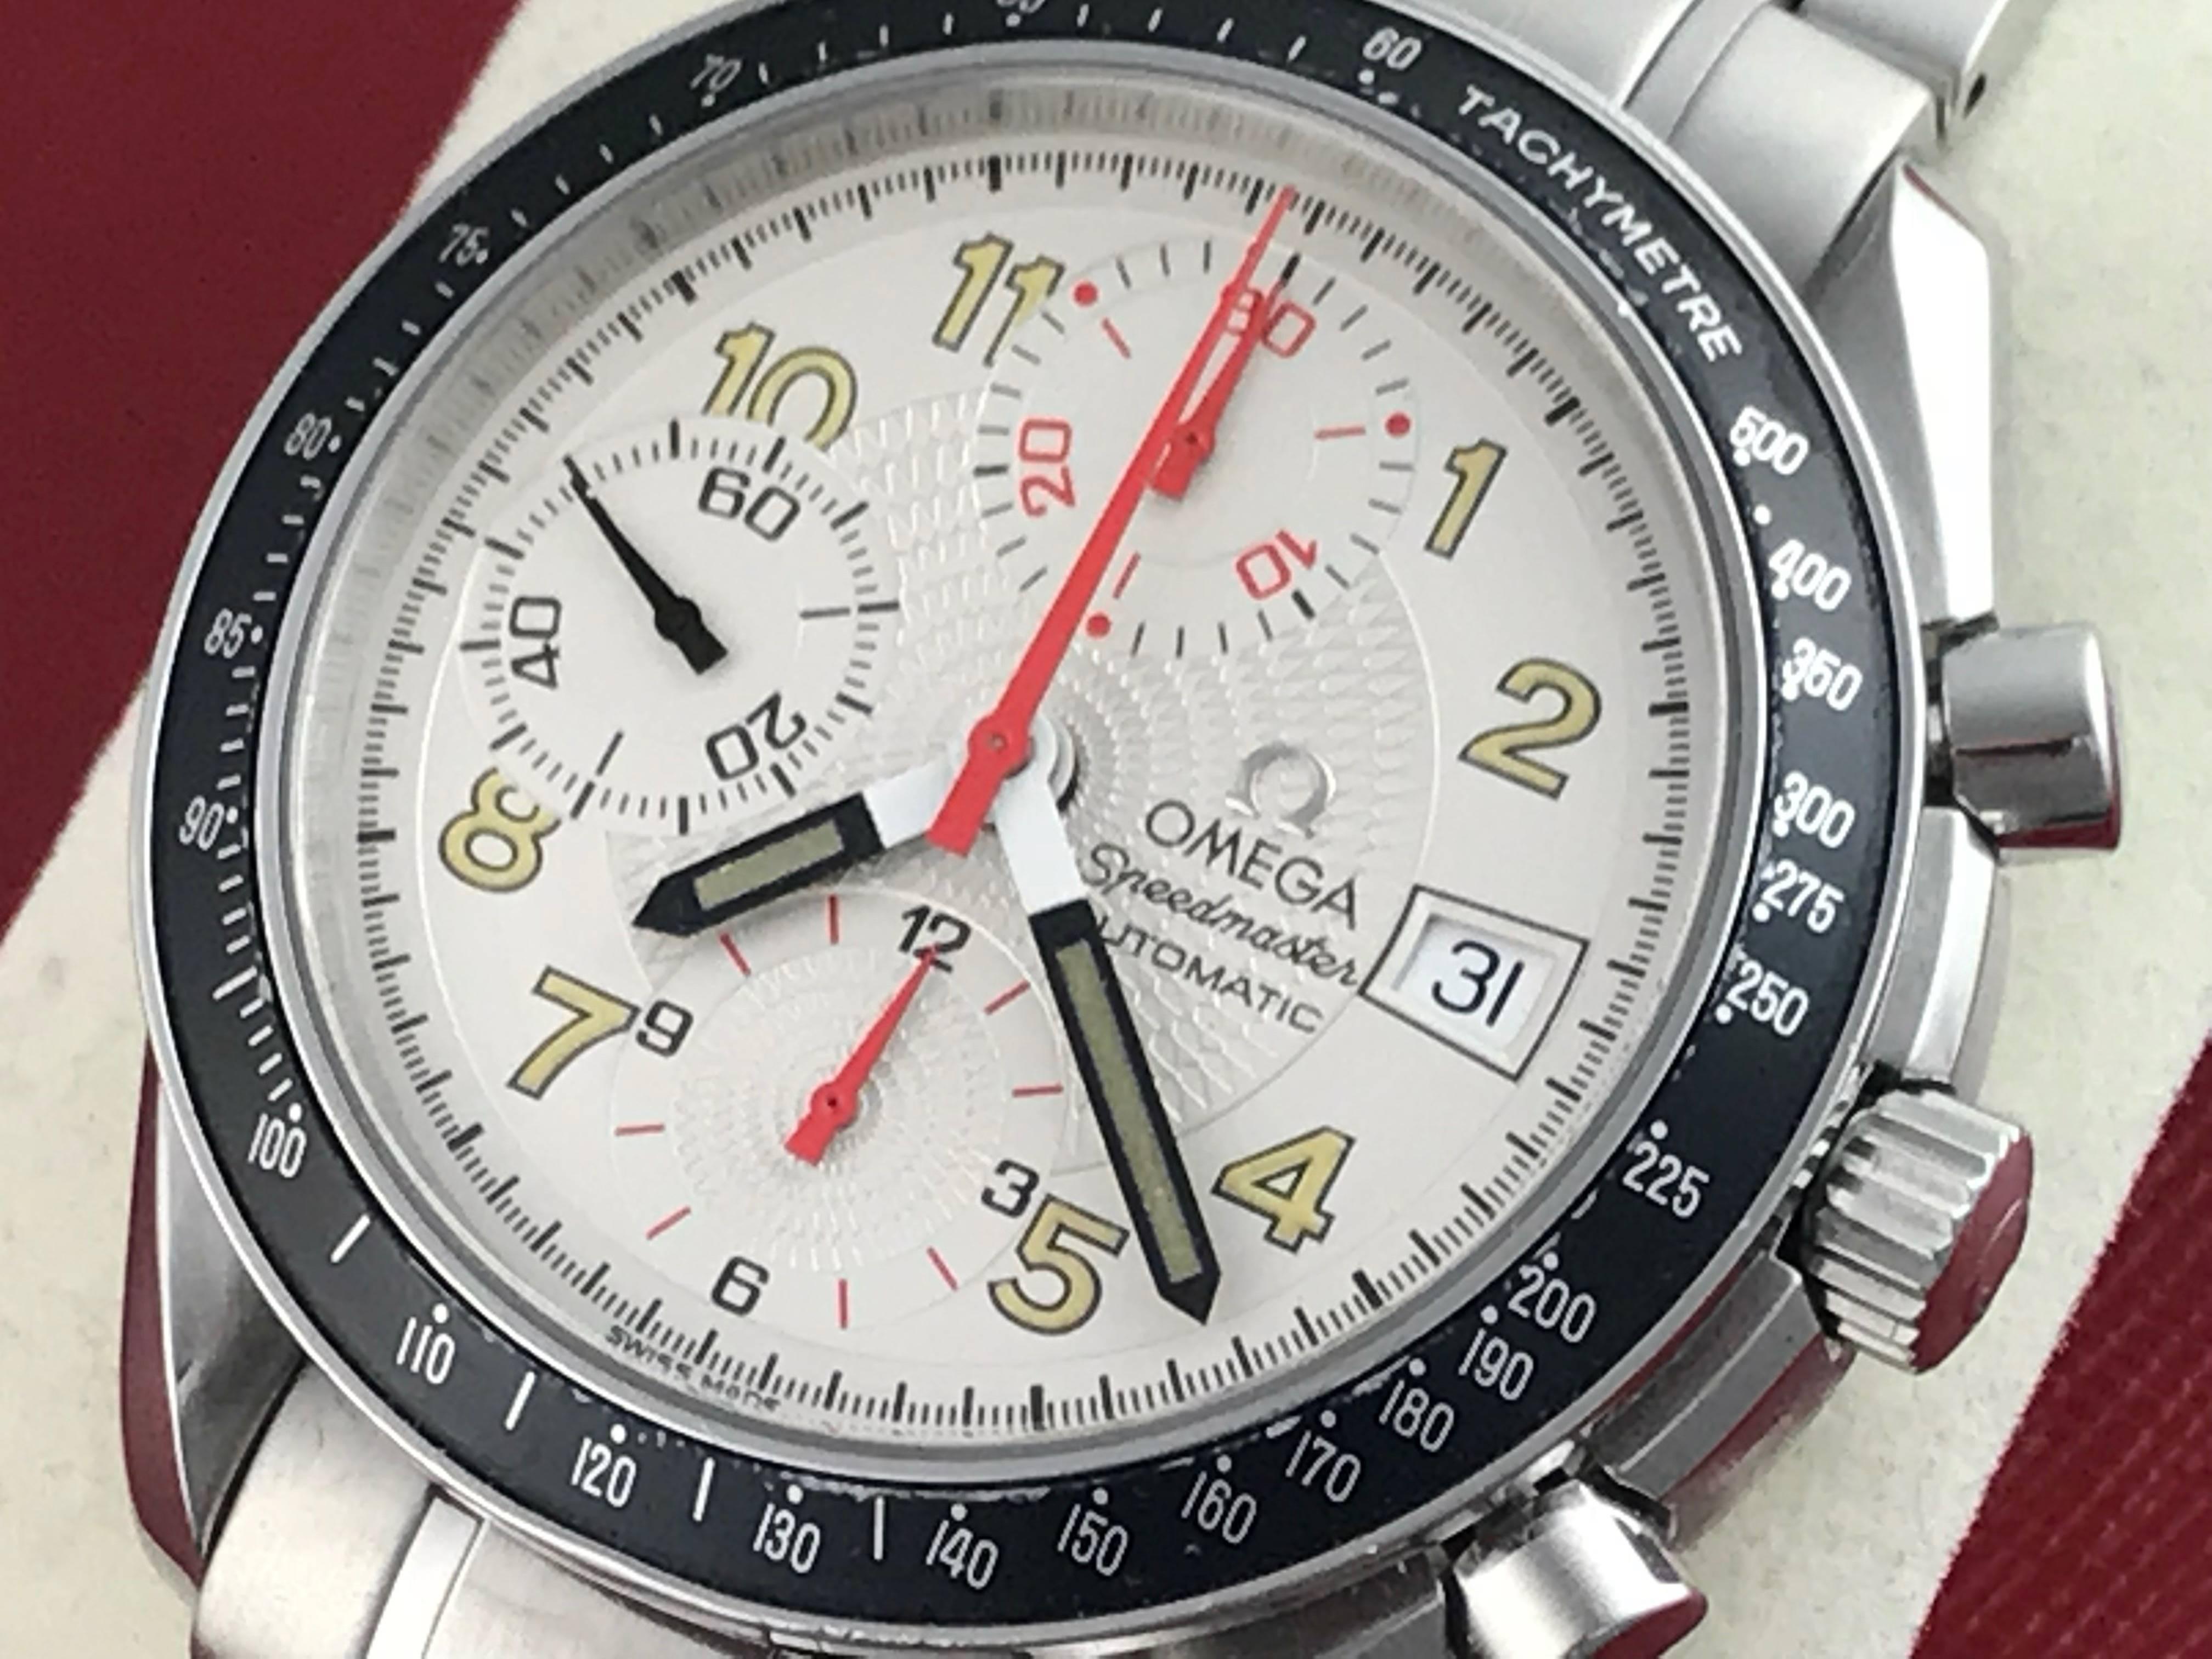 Mens Omega Speedmaster Model  3513.33.00 Stainless Steel Wristwatch.  Automatic Winding Movement with Date and Chronograph. Stainless Steel case with black Tachymetre bezel (37mm dia.). Stainless Steel Omega bracelet with deployant clasp. Silvered